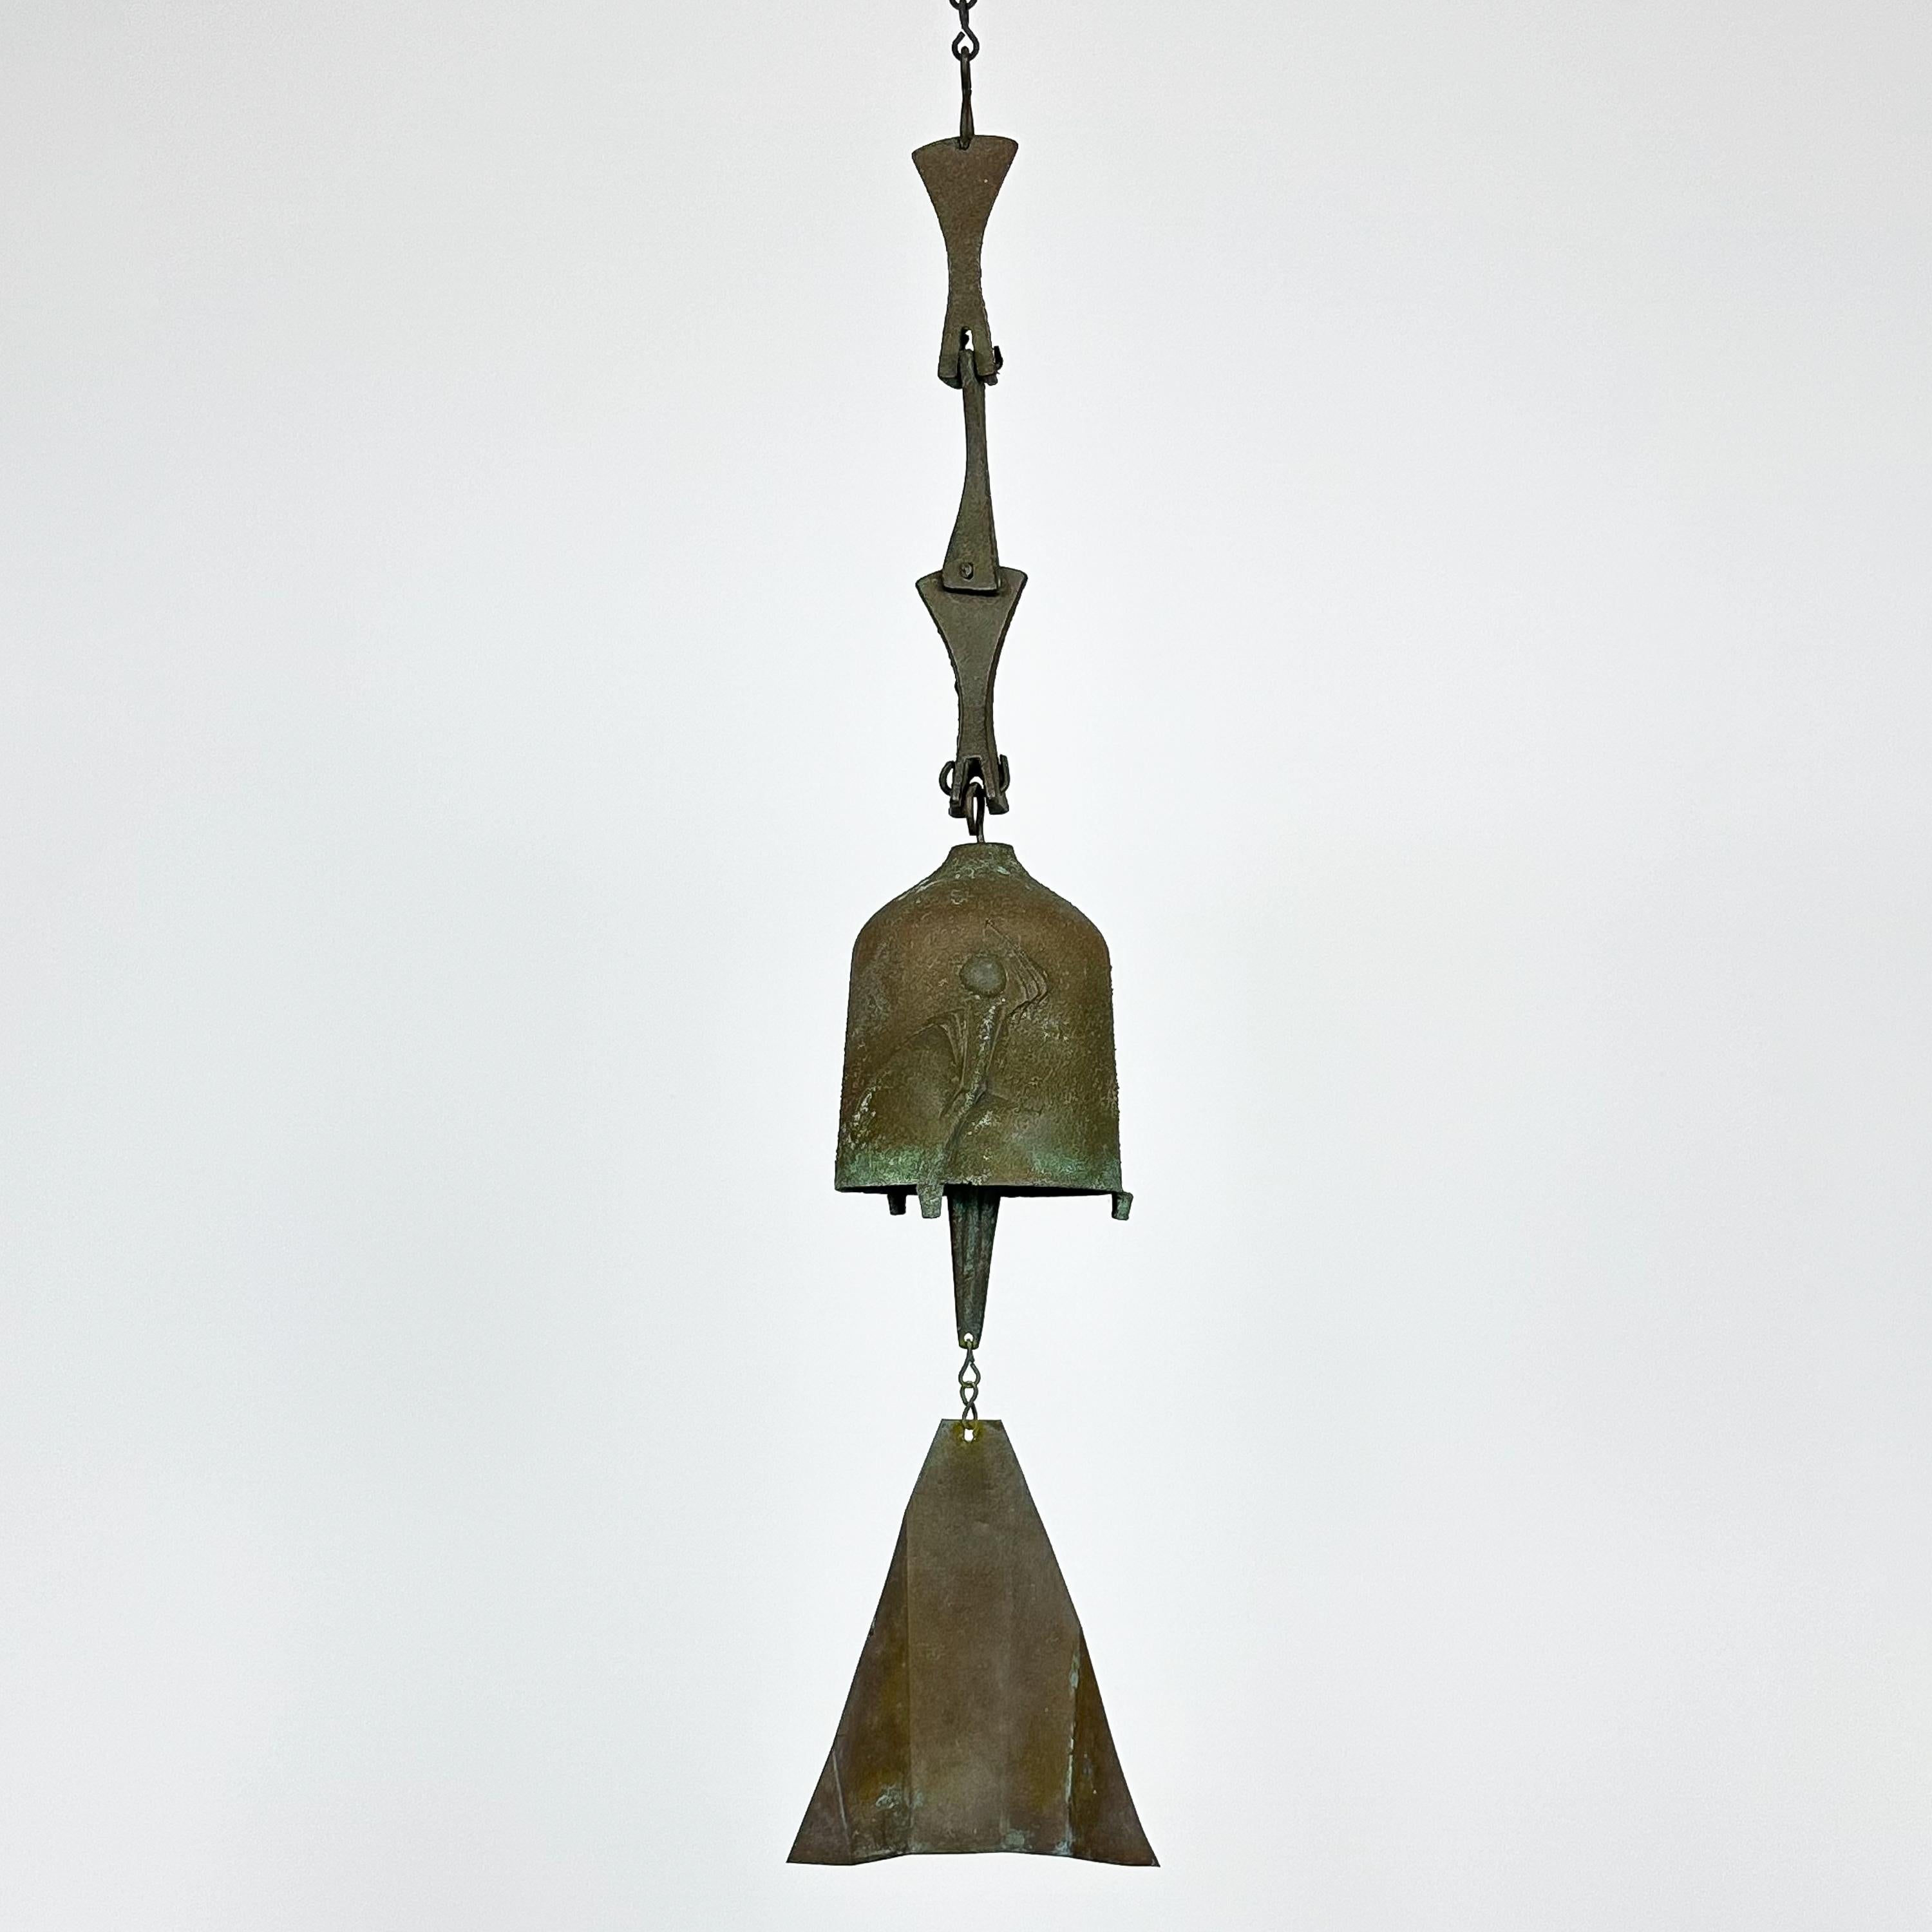 A vintage Brutalist bronze bell / wind chime designed by architect, Paolo Soleri for Arcosanti , circa 1970s. This gorgeous cast solid bronze Soleri bell features a beautiful patina, abstract design on the bell and three part hinged bronze chain.